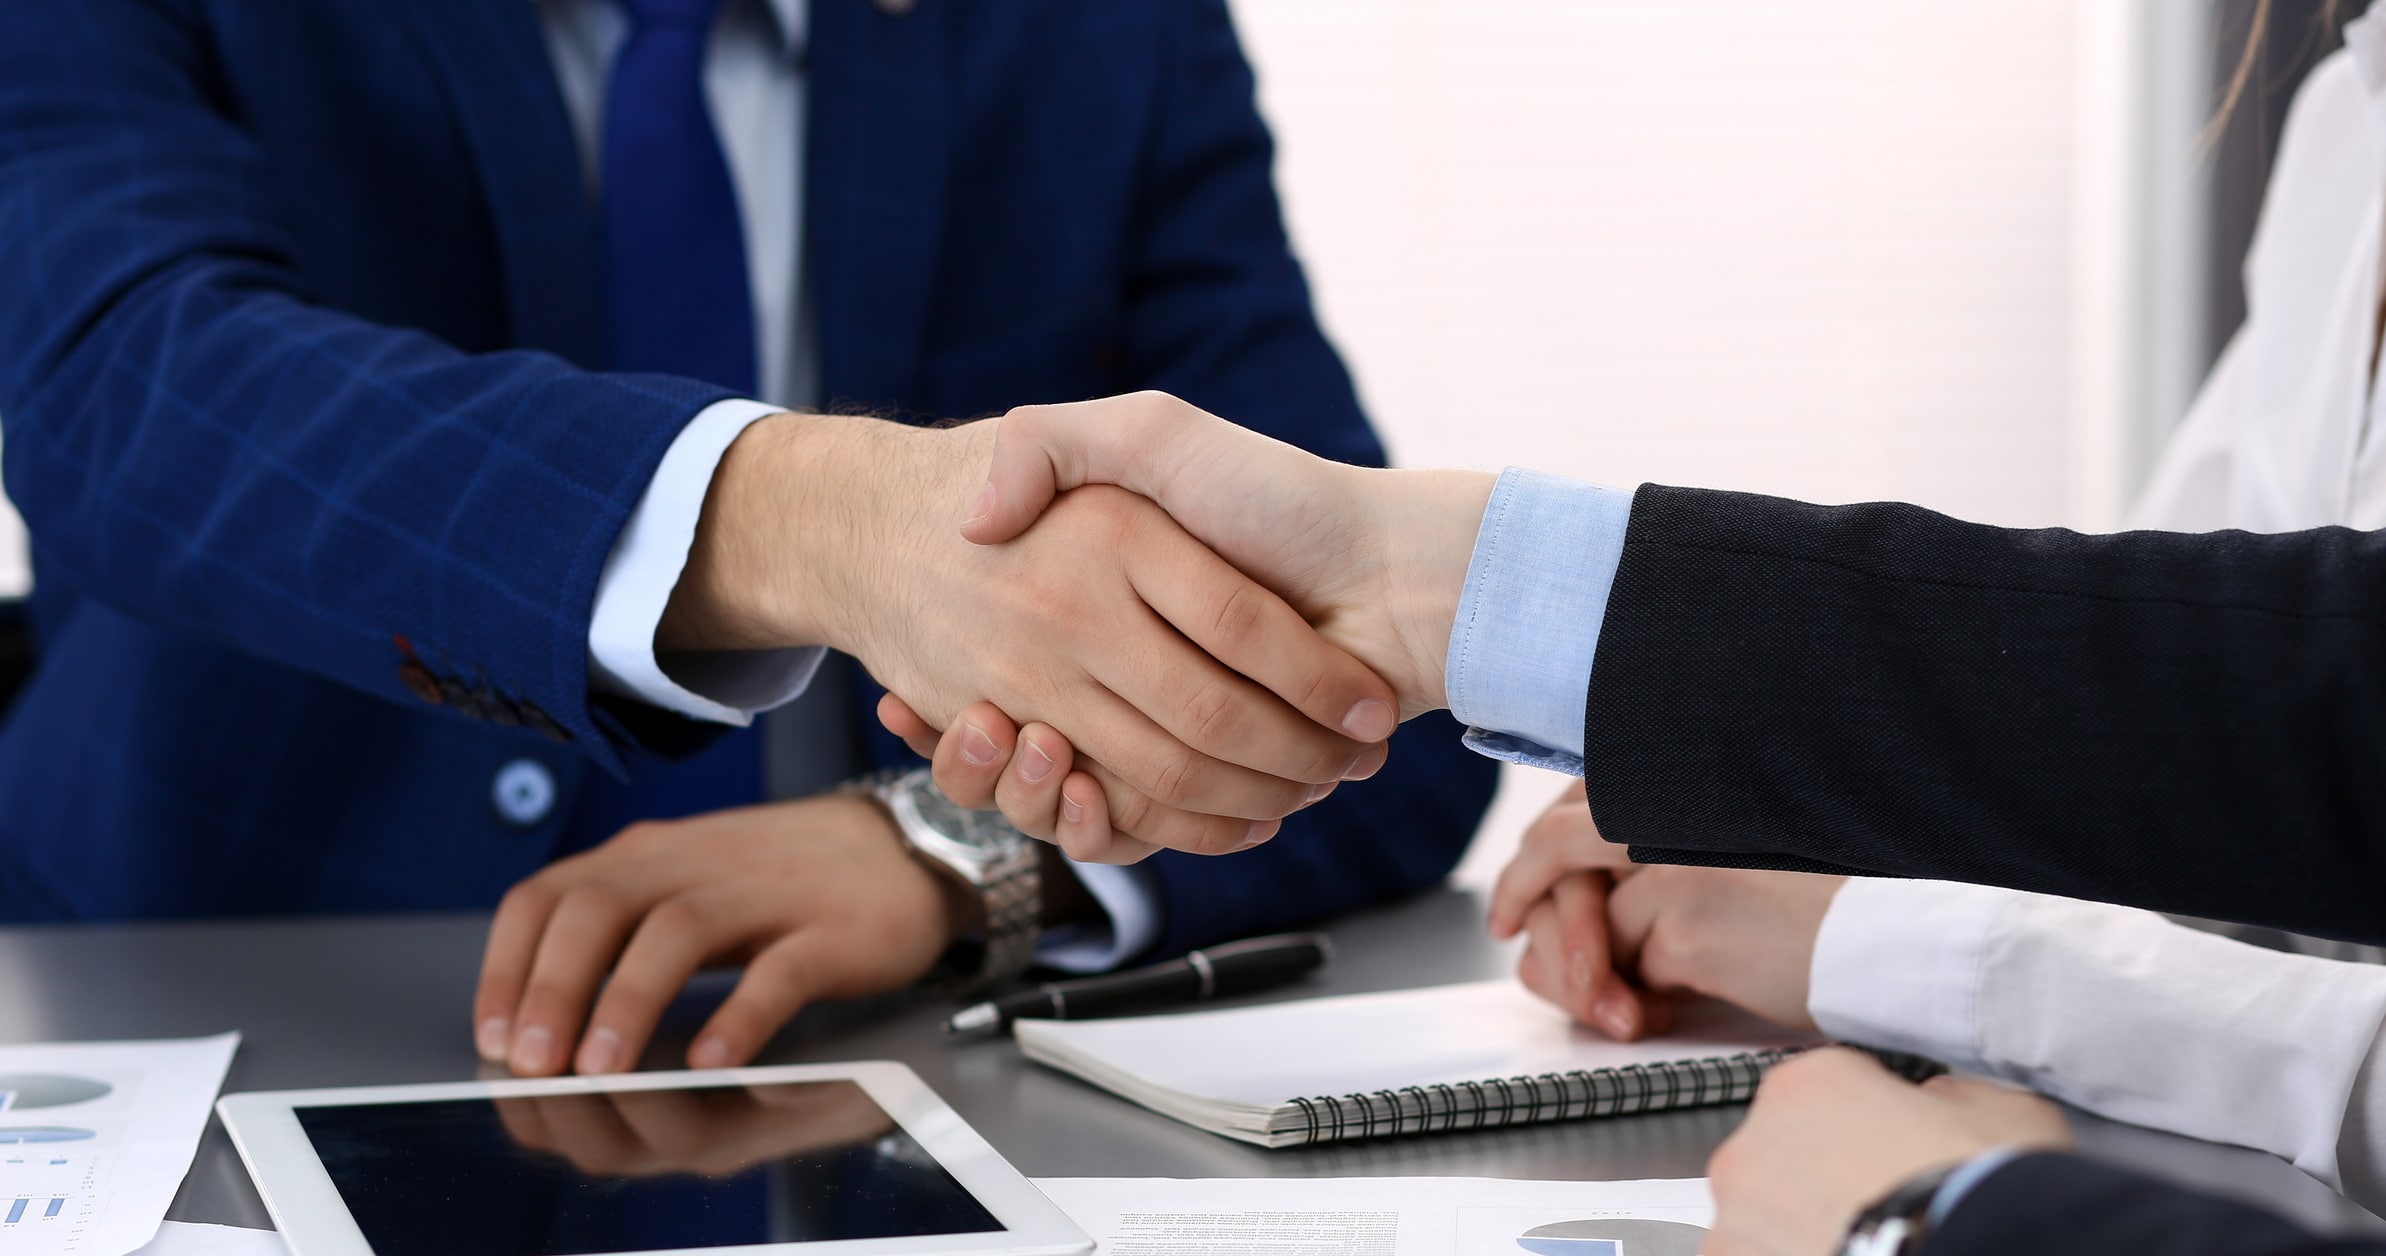 shaking hands in business setting